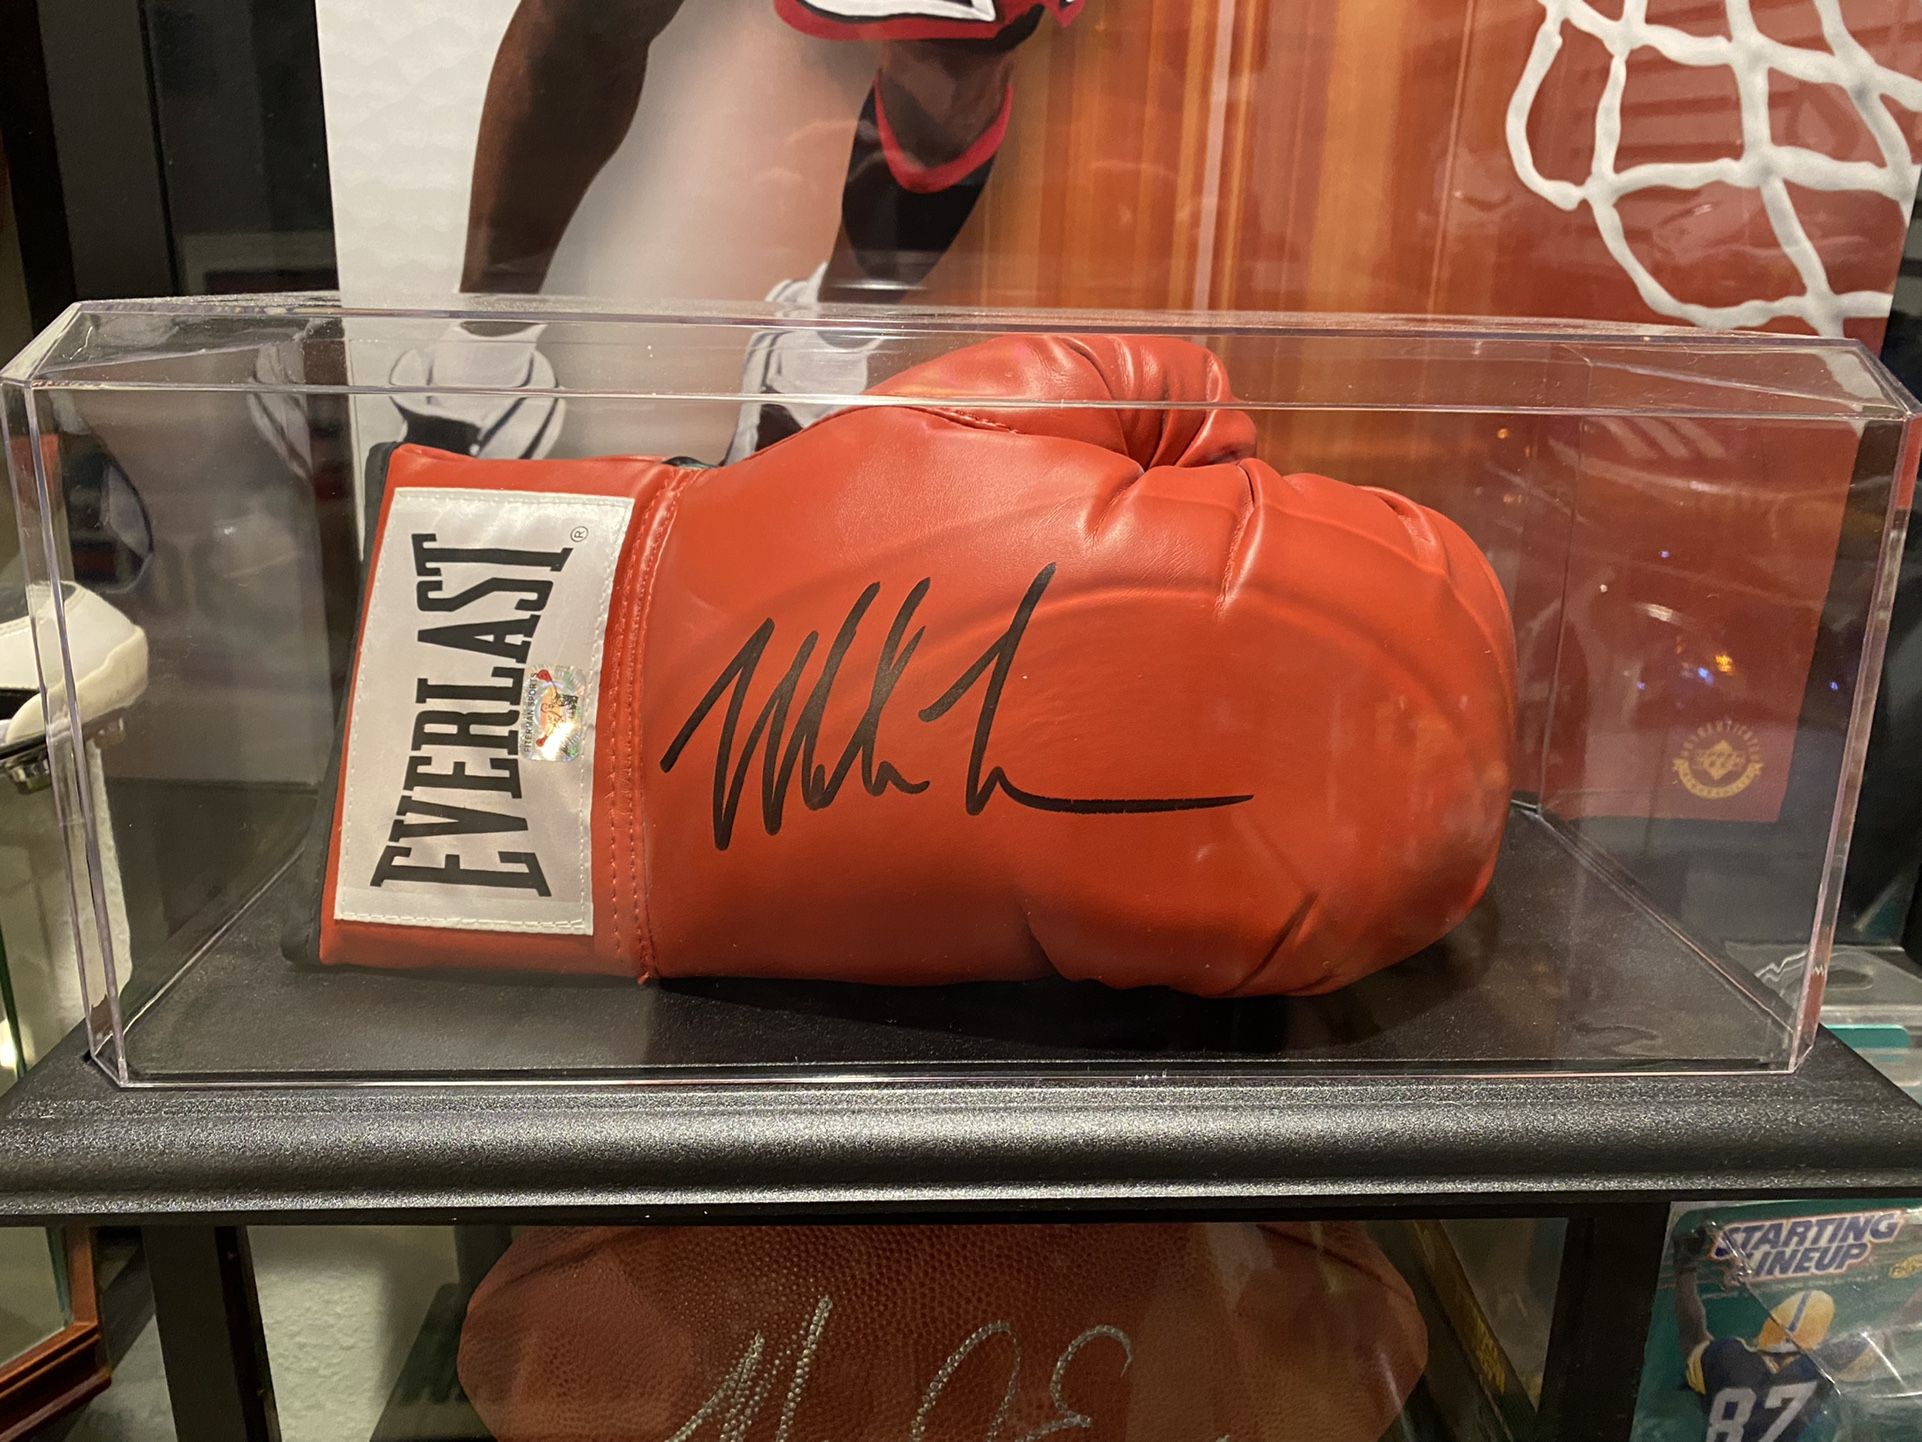 Mike Tyson Signed Glove And New Display Case Certified With Hologram Mint Condition 